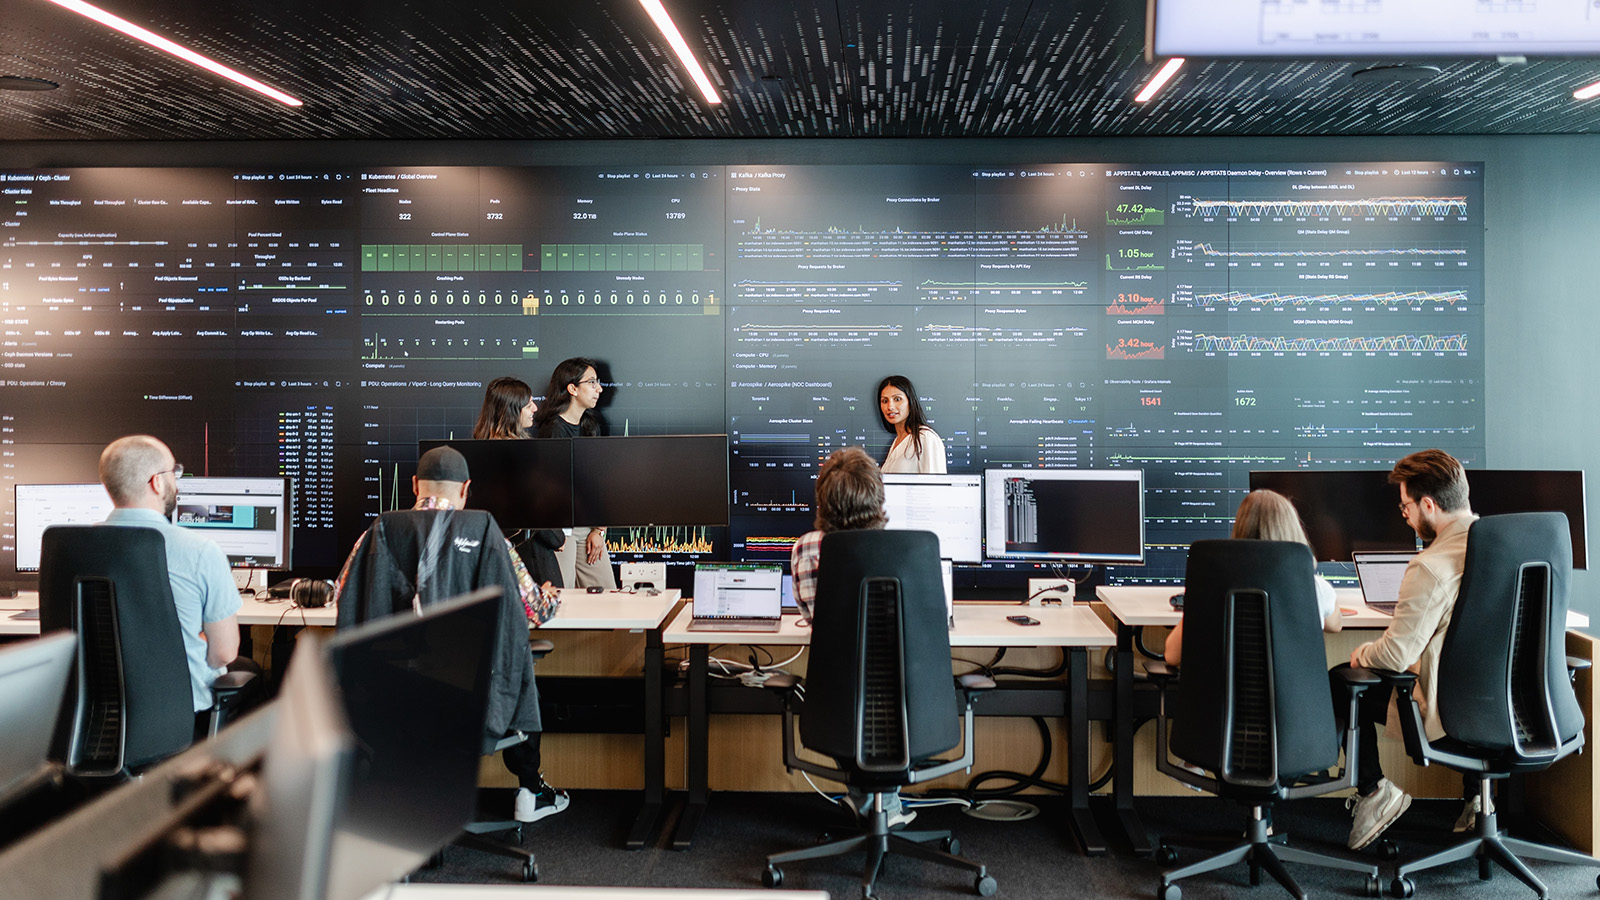 Engineering at Index is about collaboration and our team members are seen gathering data insights from our NOC wall